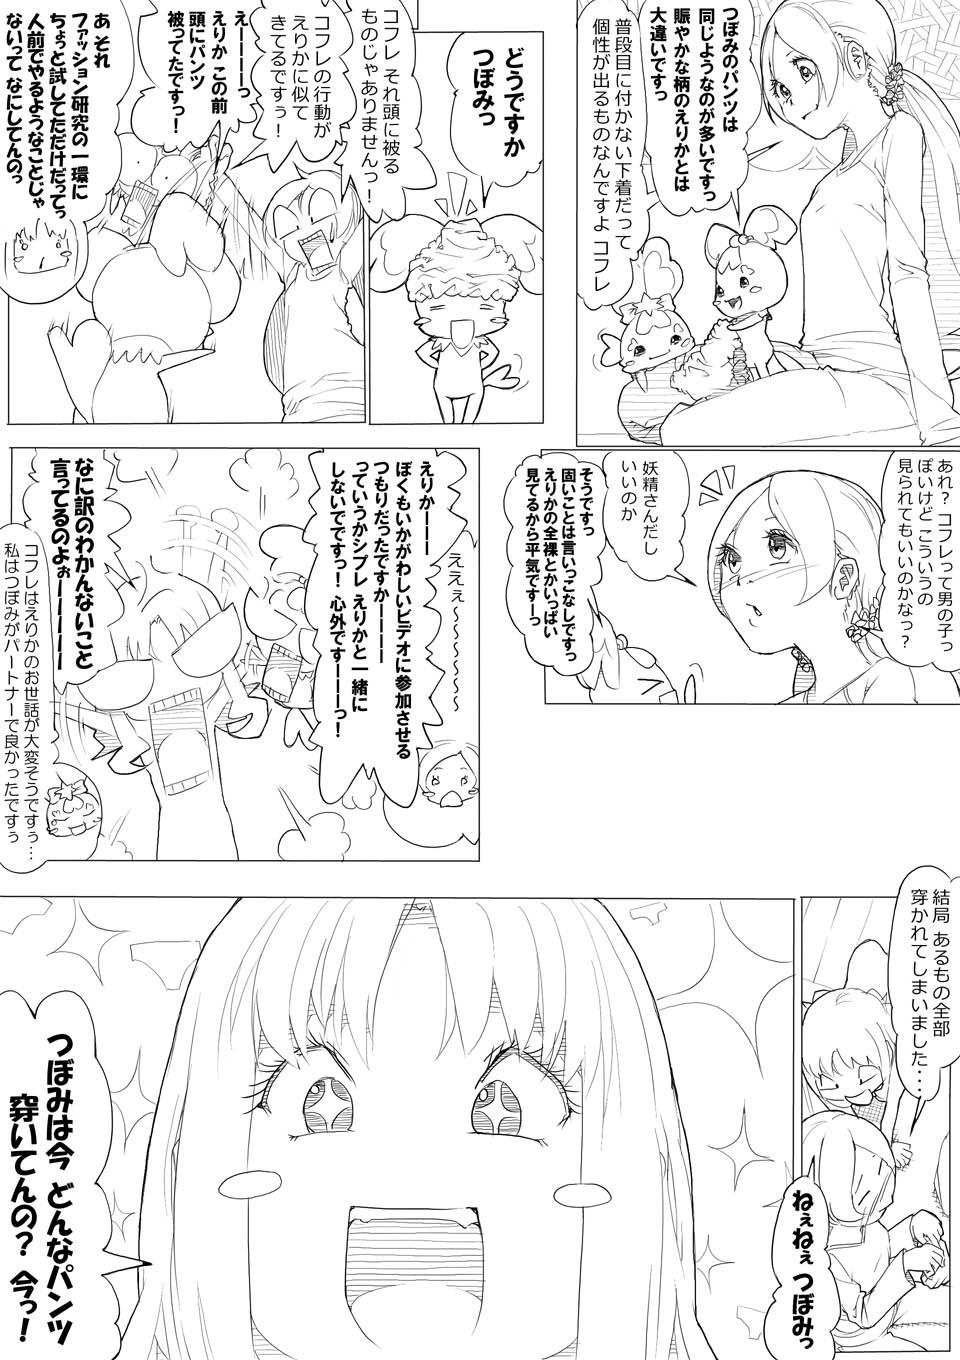 Aunt ハトプリ - Heartcatch precure Goth - Page 10